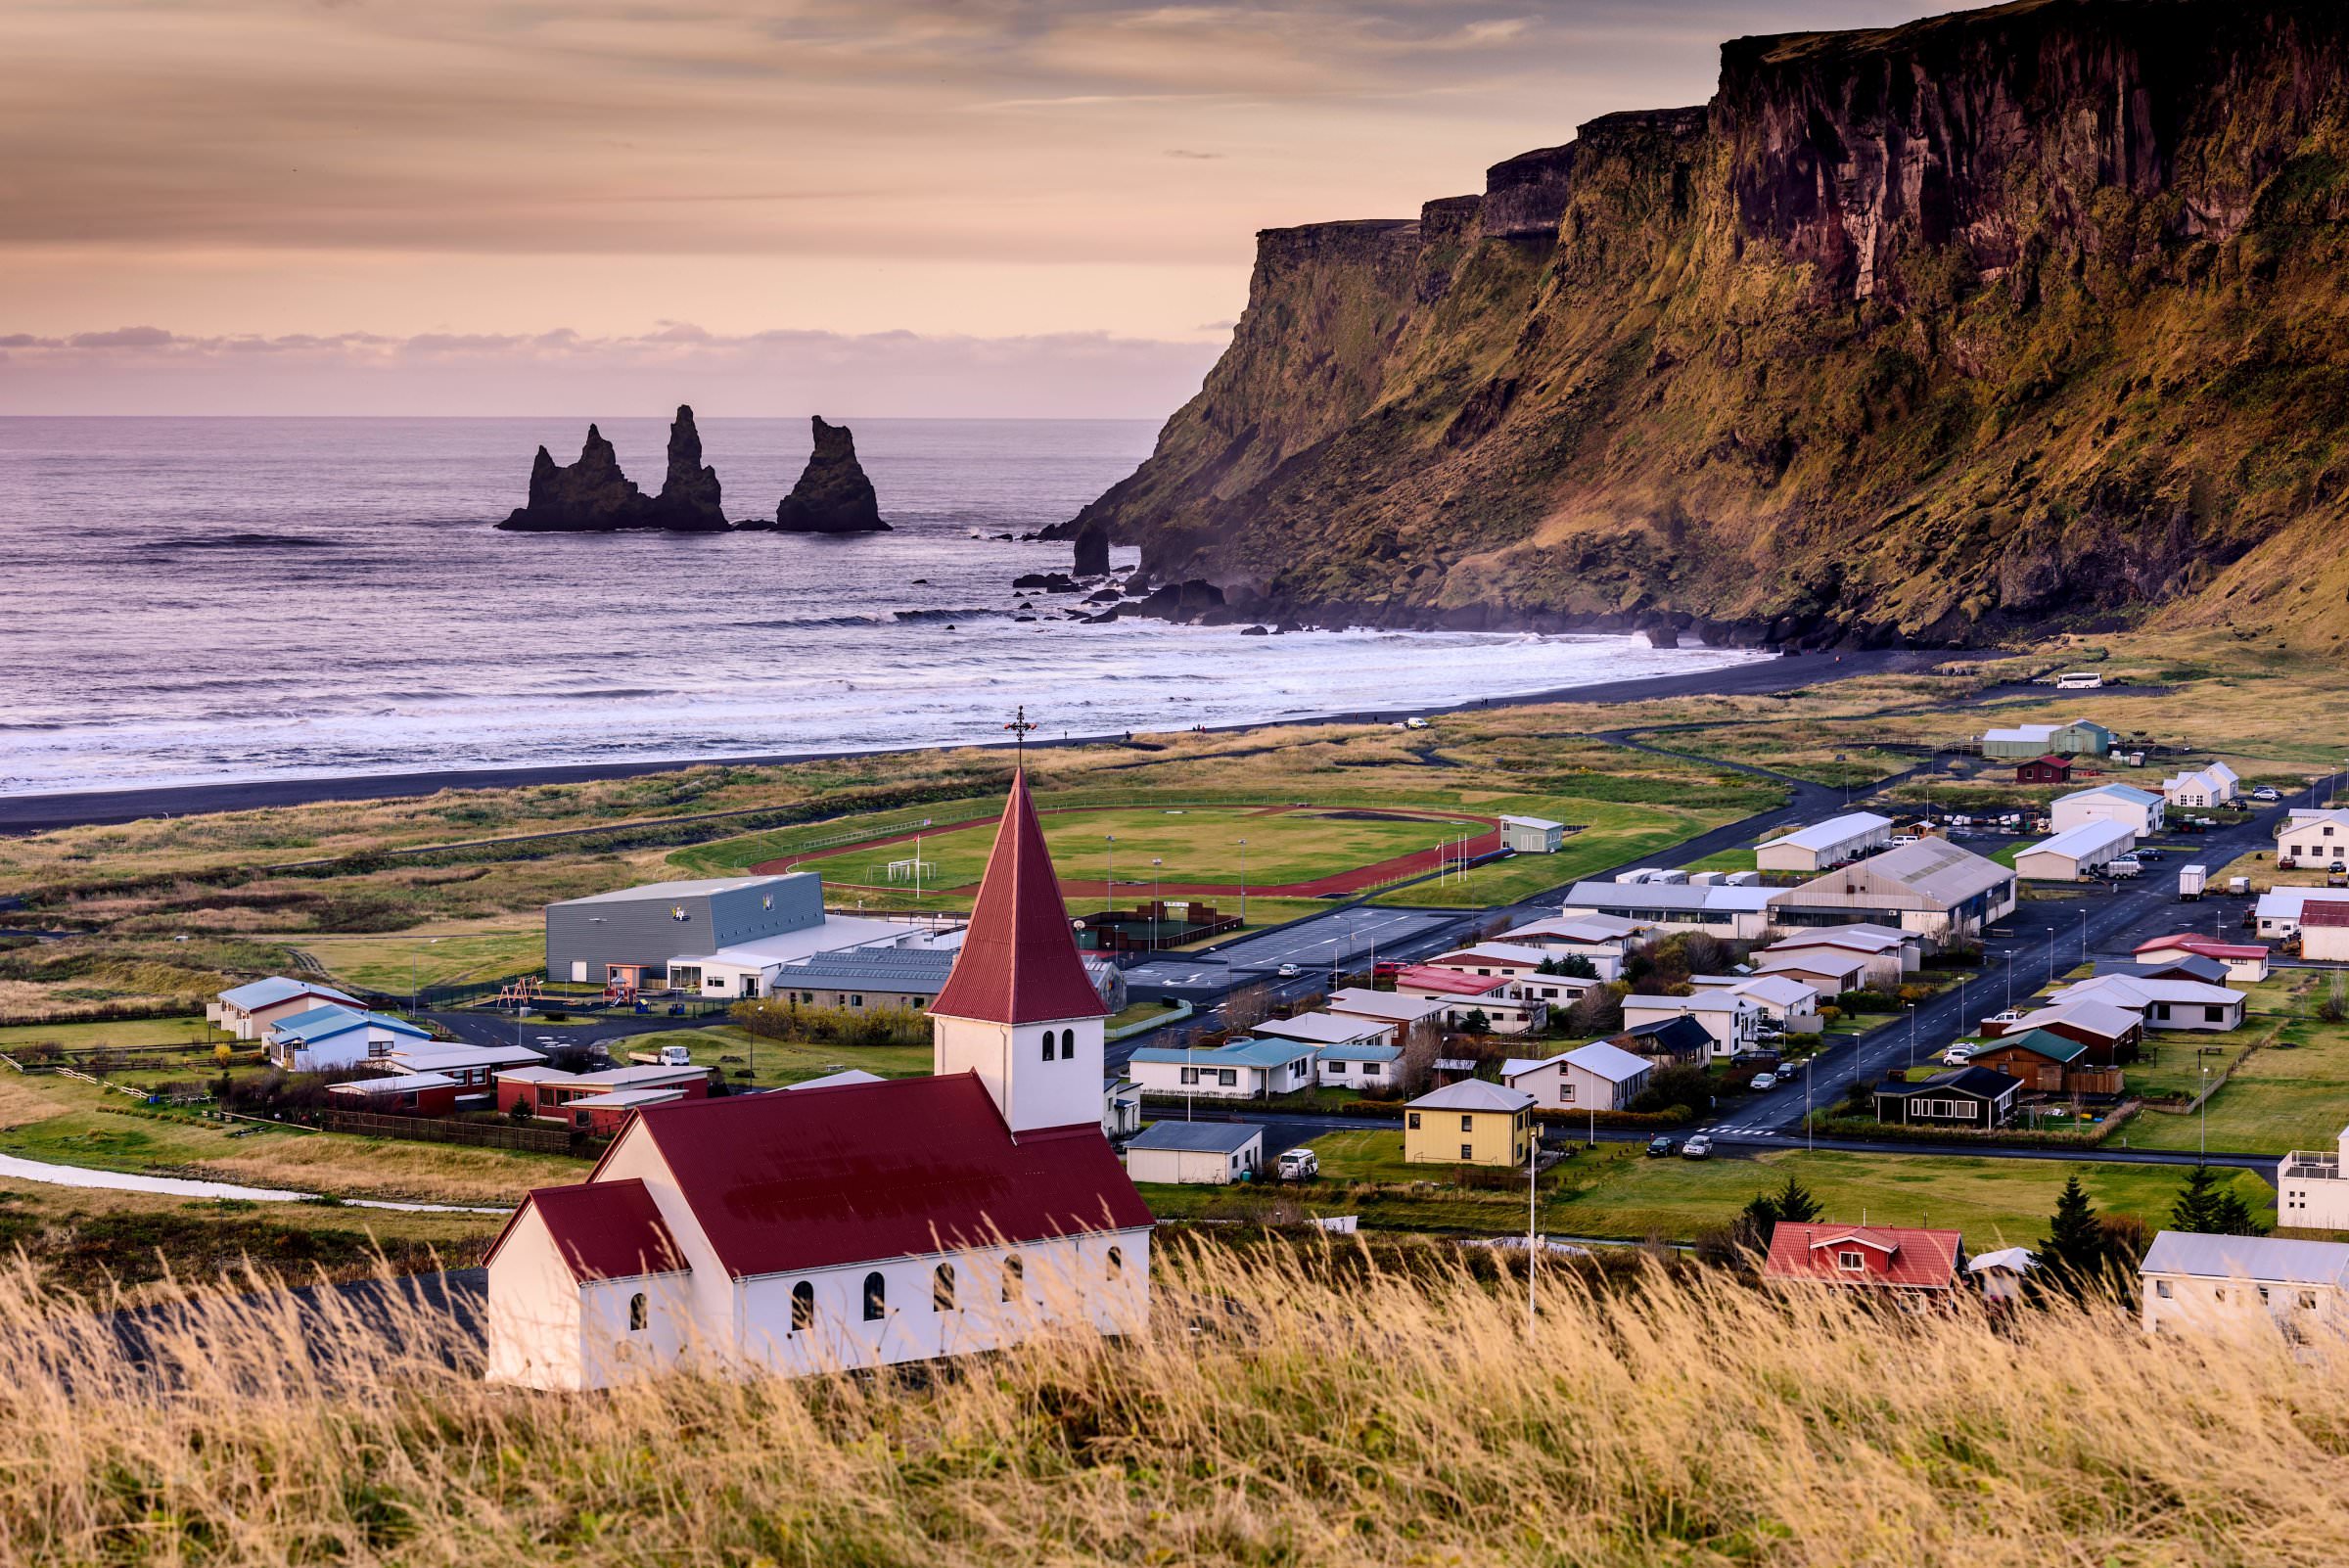 Impeccable 6 Nights Iceland Honeymoon Package